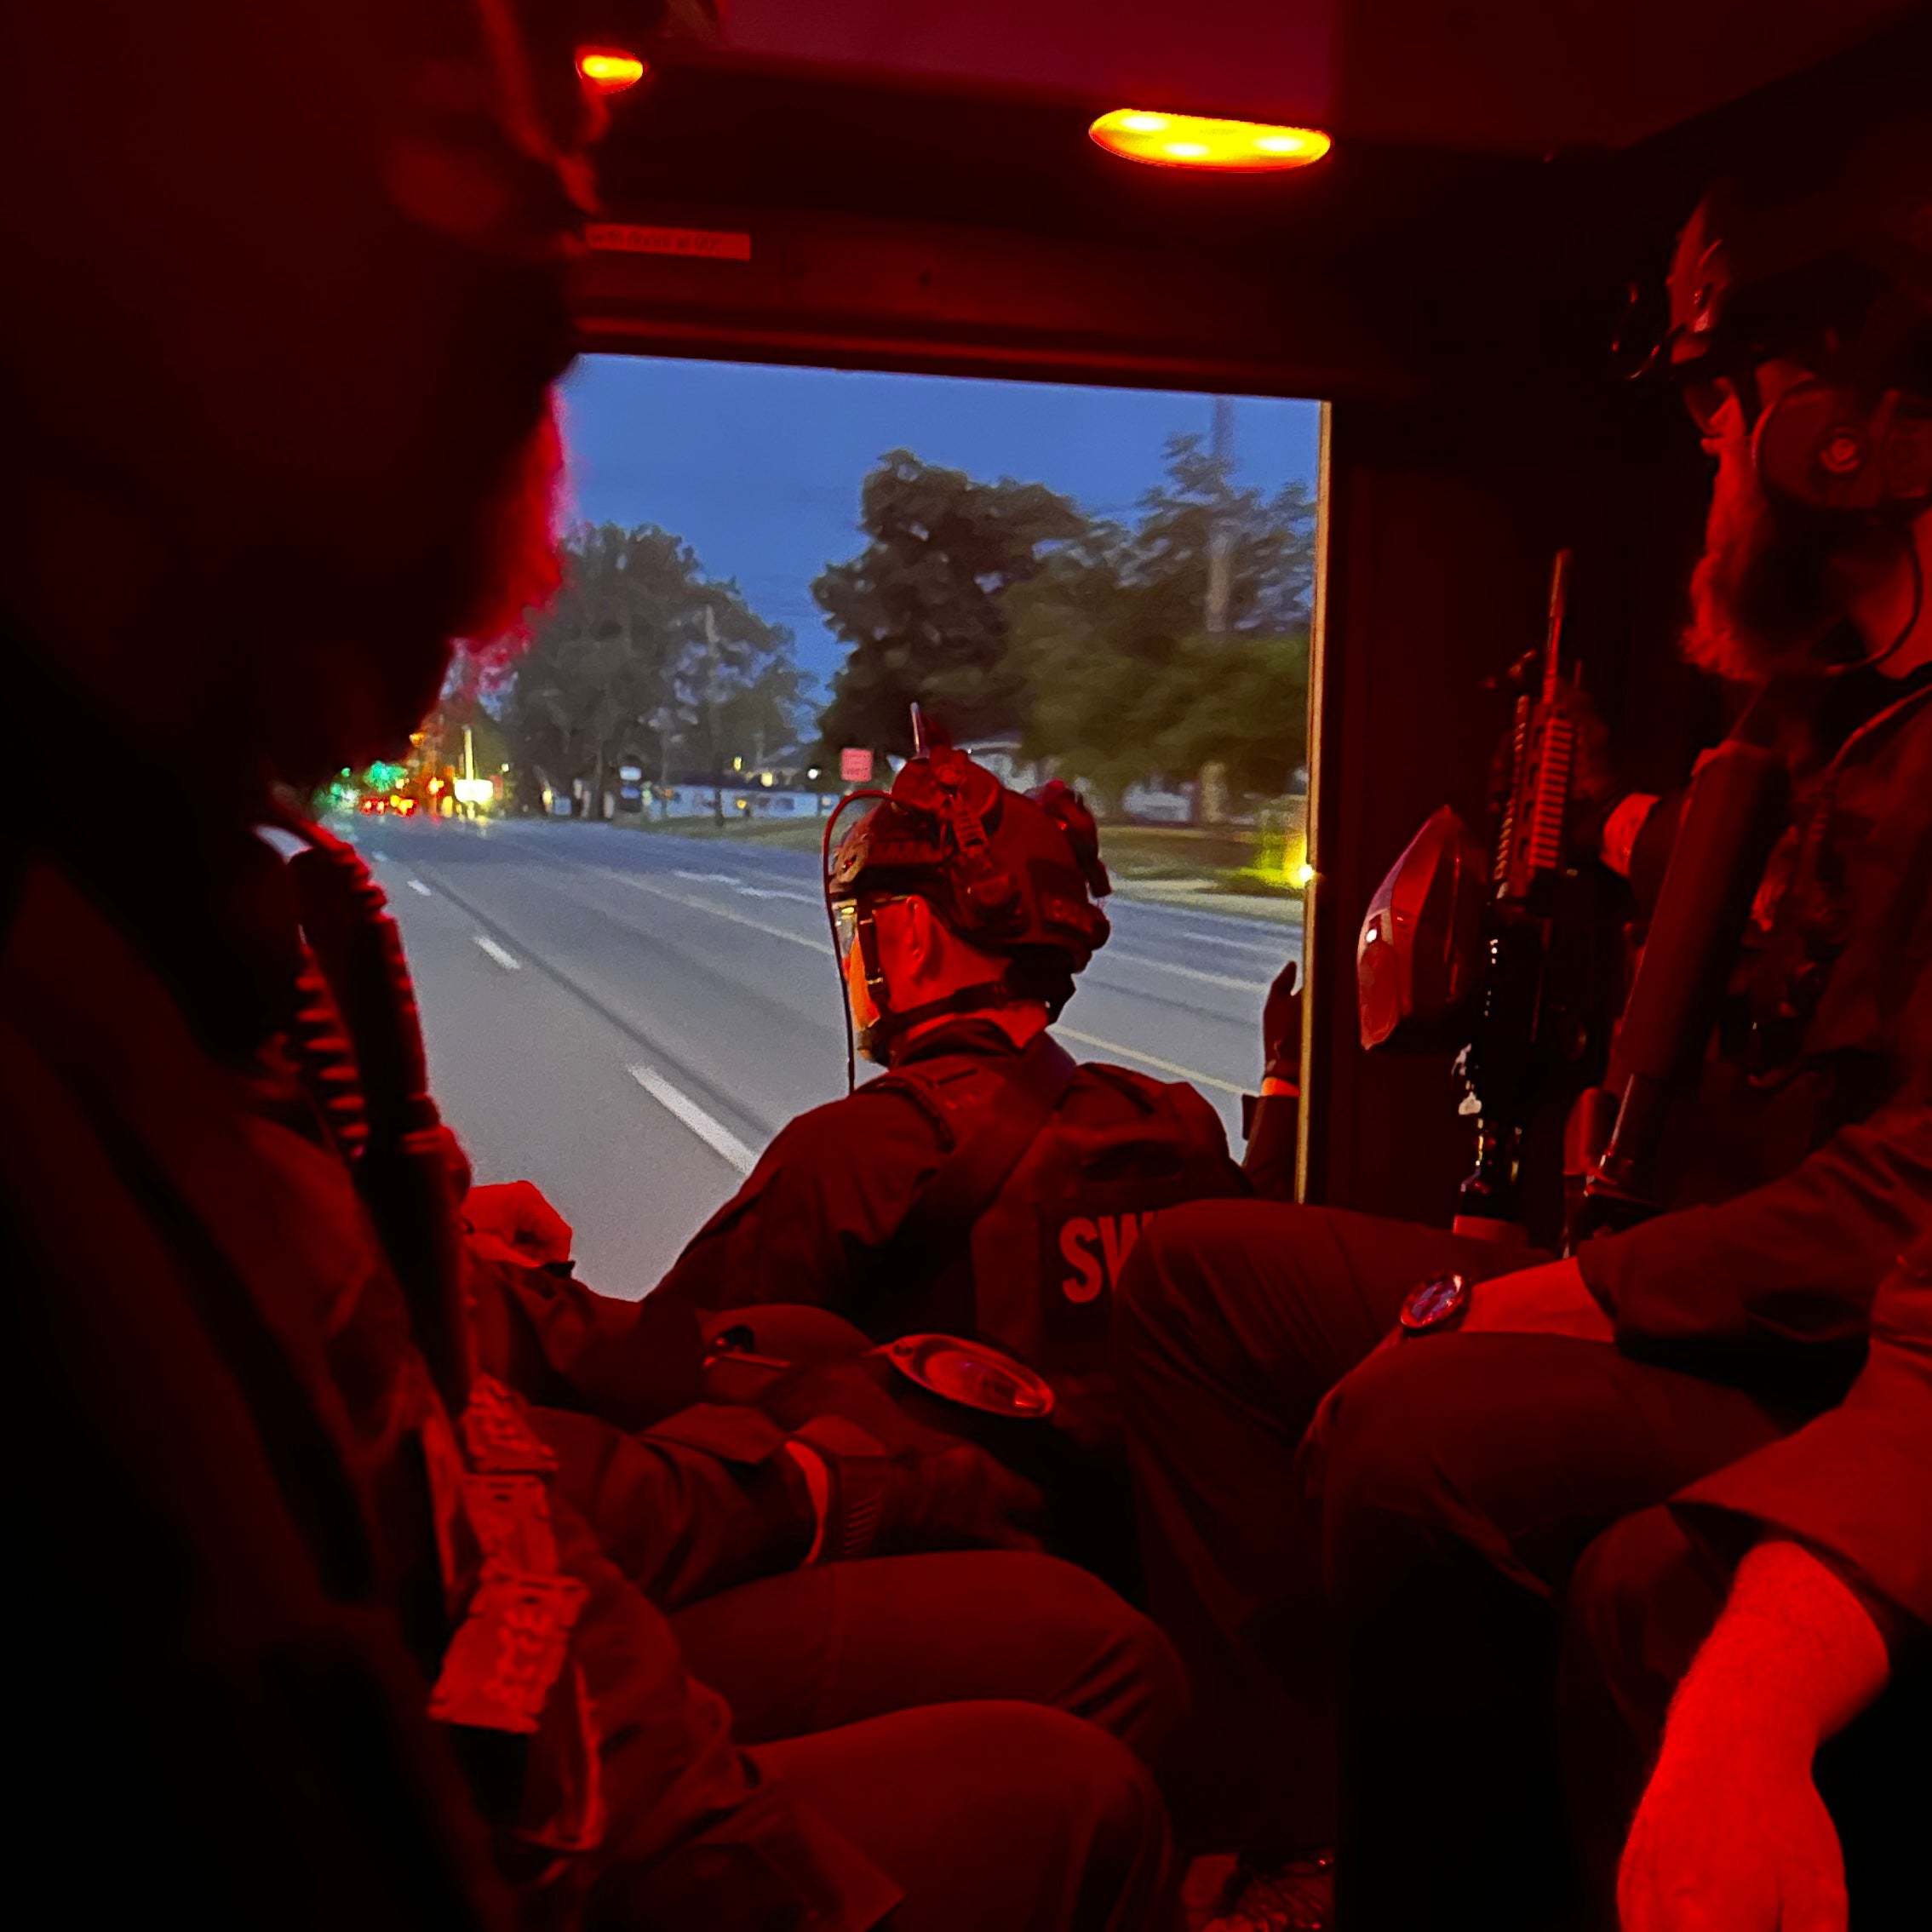 swat team in the back of an armored vehicle, red light